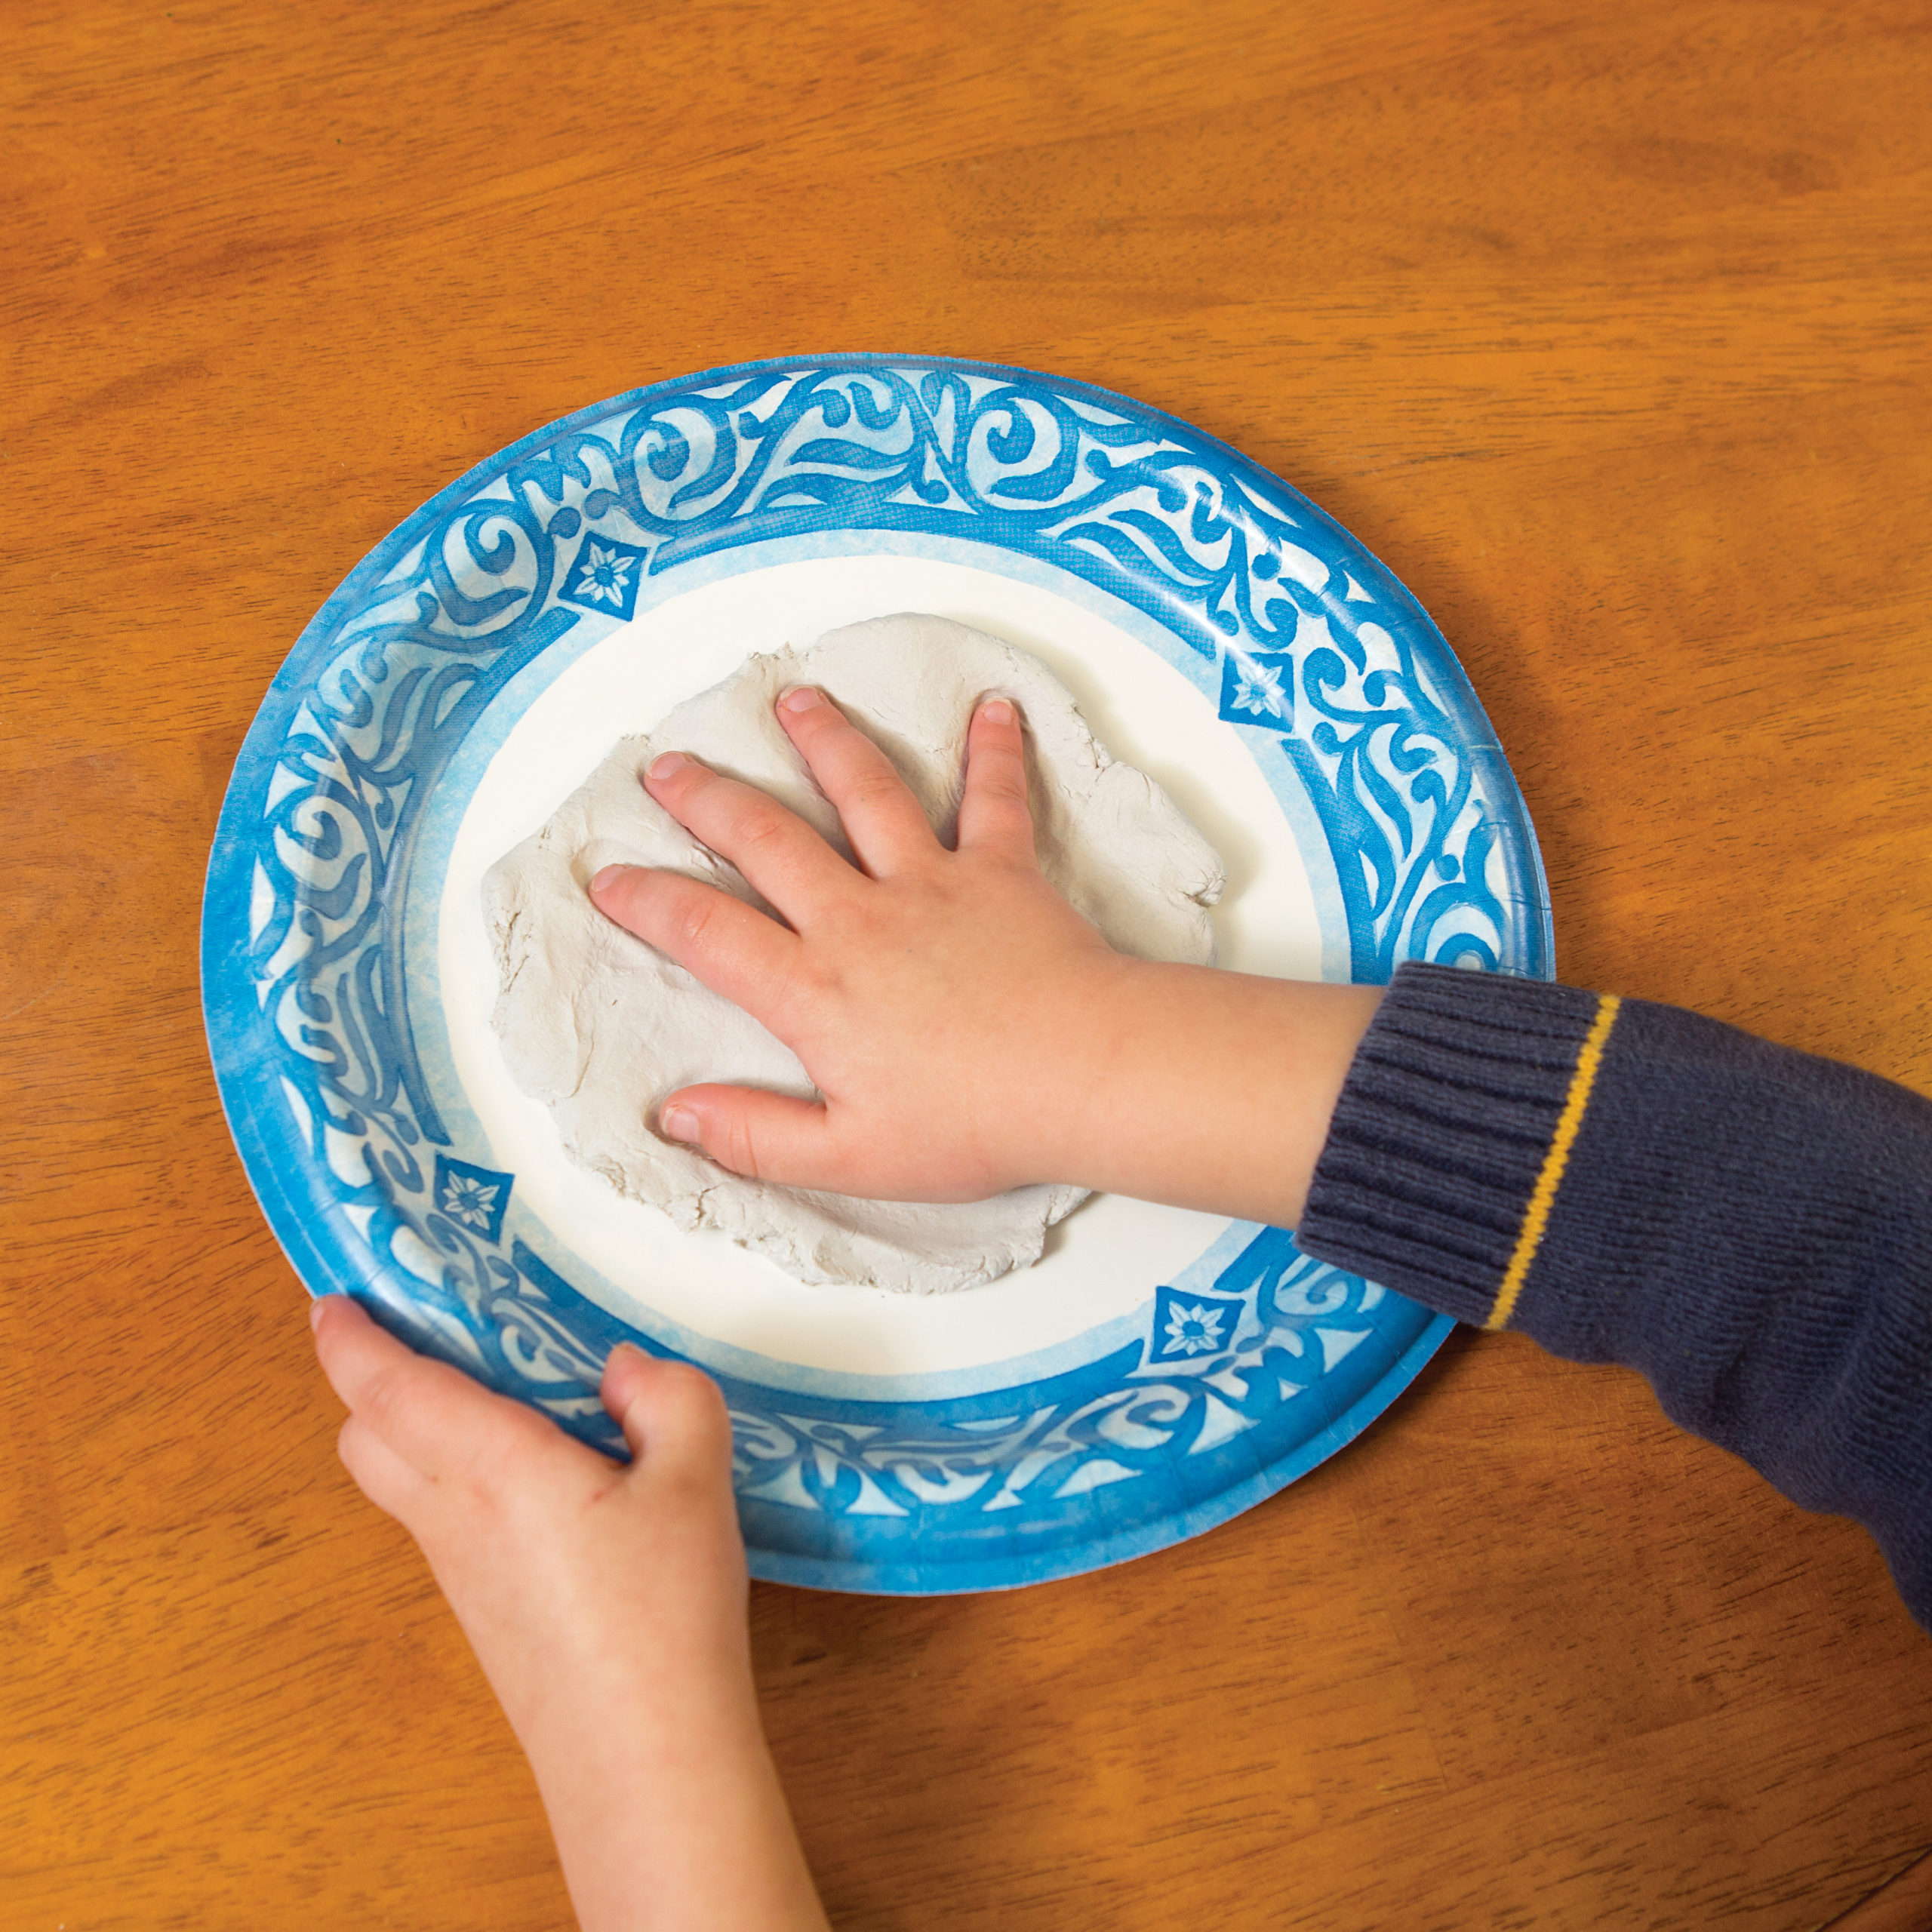 A child pushes his hand into a clay circle